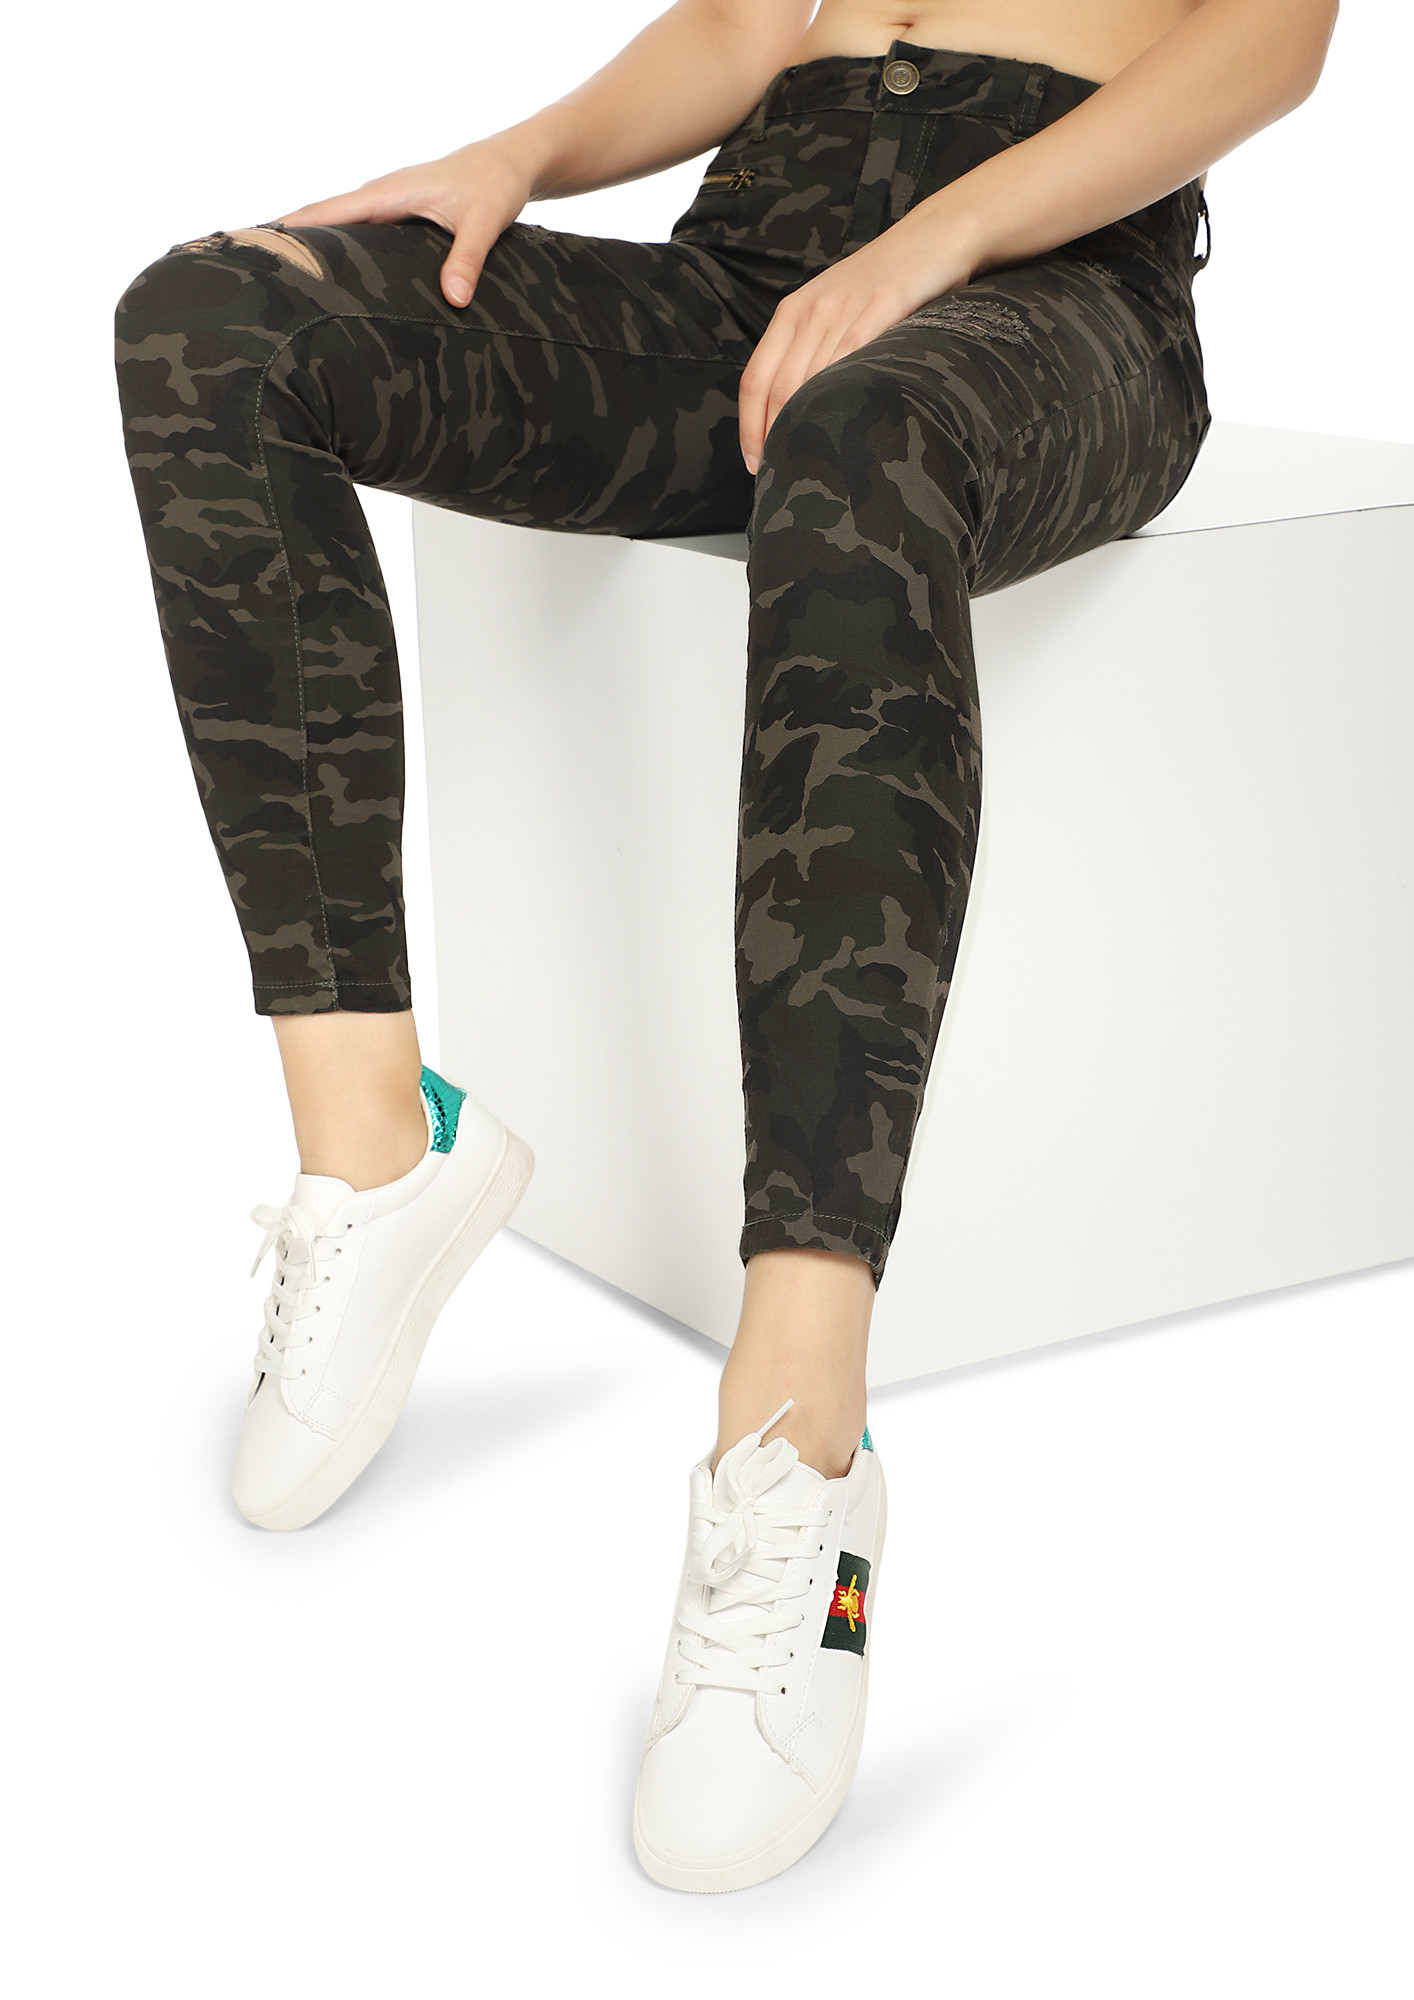 COOL MEAN Lycra Camouflage Dry Fit Regular Print Track Pants, Joggers,  Sports Gym Pants for Men_Multi Colors (M, Black) : Amazon.in: Clothing &  Accessories